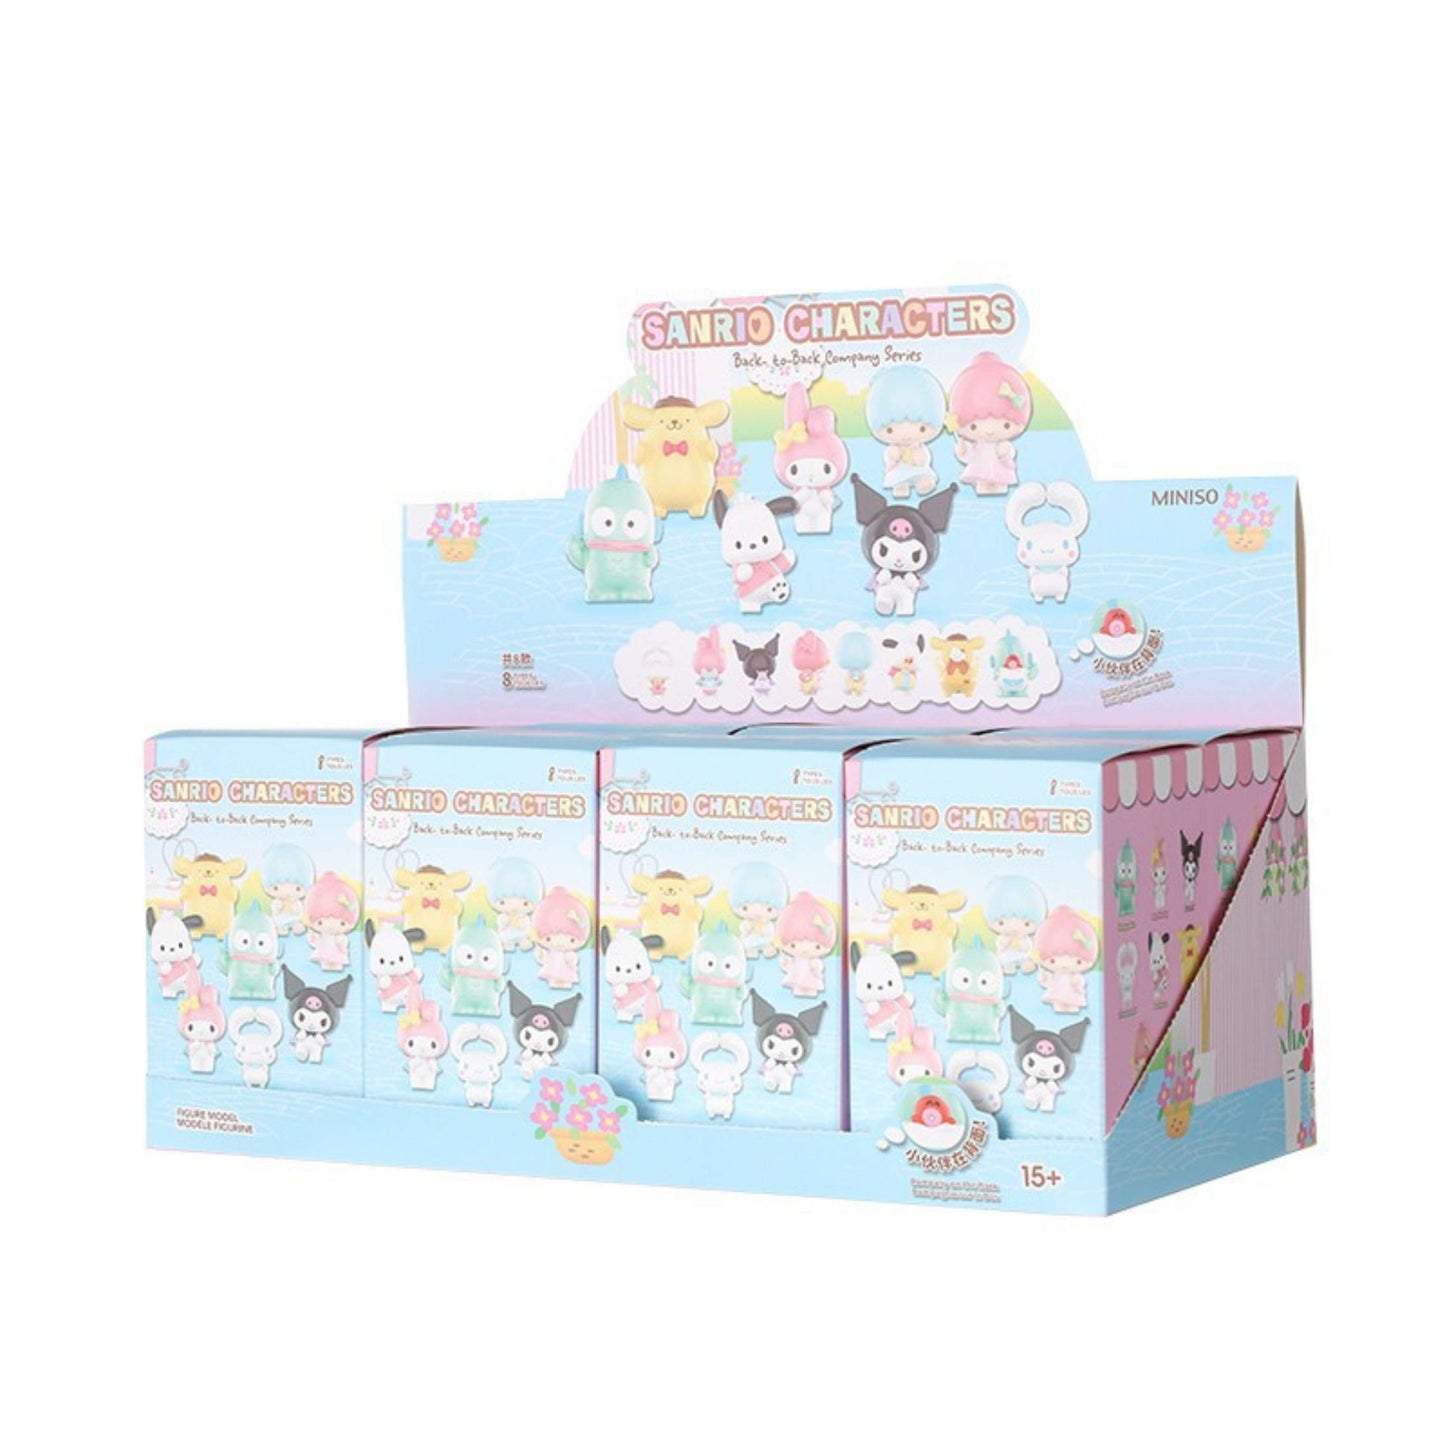 Miniso Sanrio Characters: Back to Back Company Series Blind Box - Whole set of 8